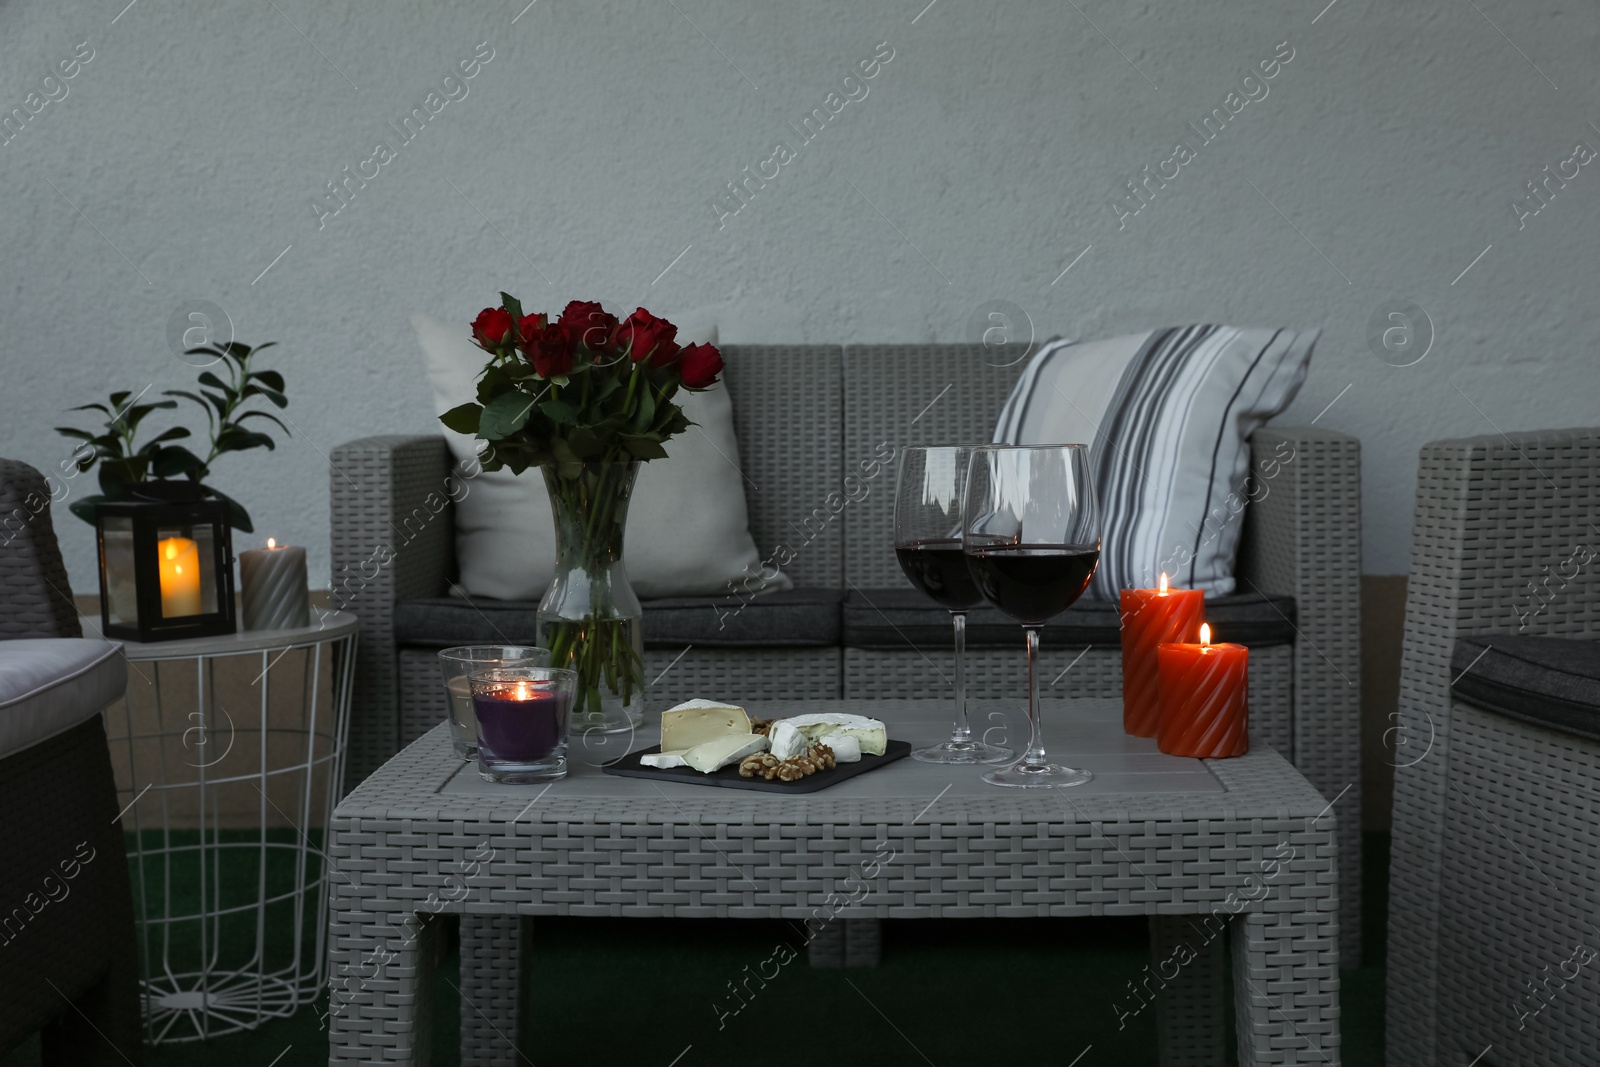 Photo of Glasses of wine, vase with roses, burning candles and snacks on rattan table at balcony in evening